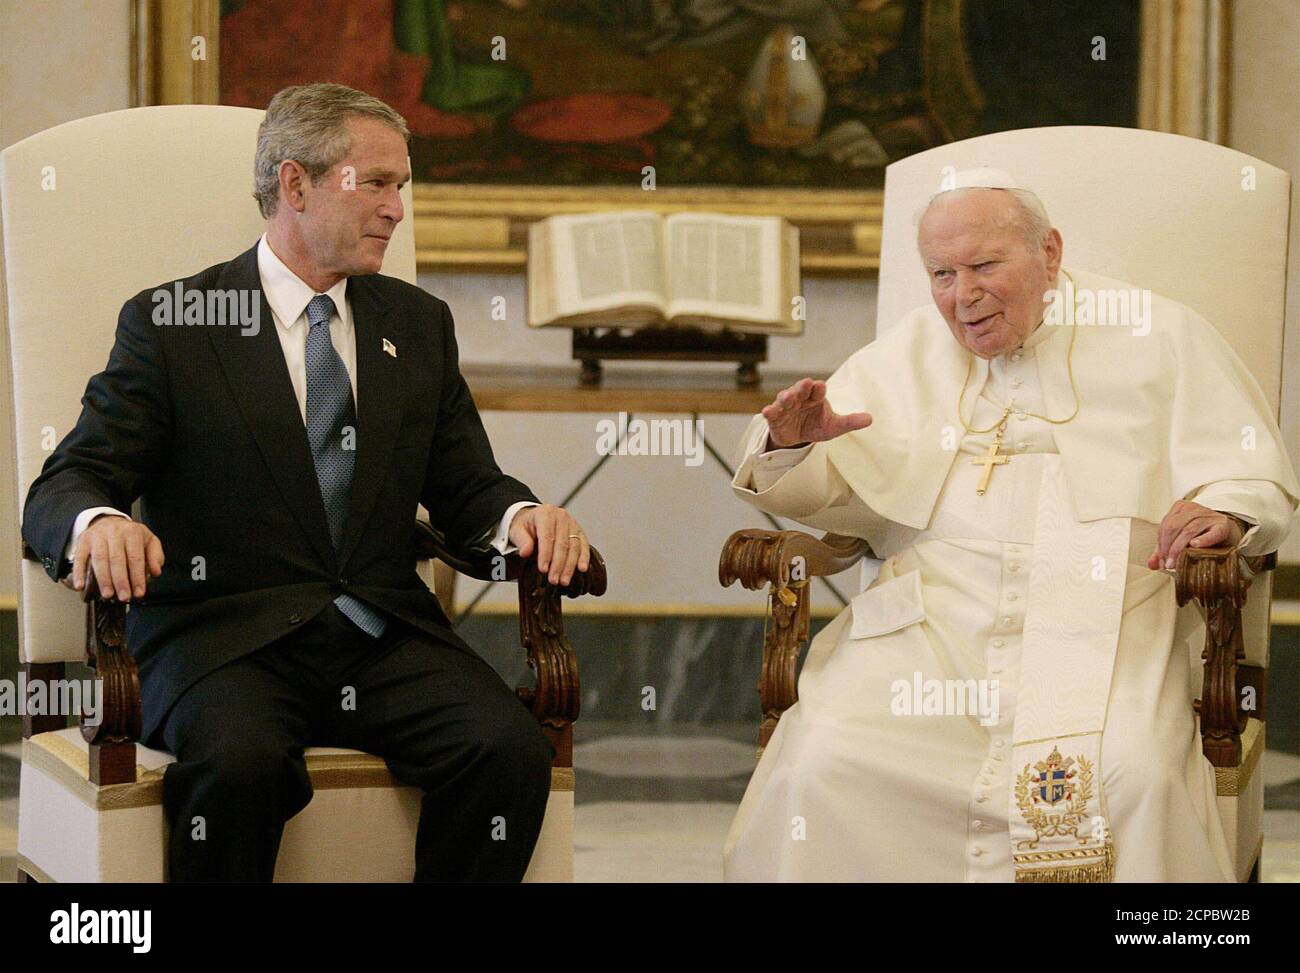 U.S. President George W. Bush listens to Pope John Paul II at the Vatican  in this June 4, 2004 file photo. John Paul neared death April 1, 2005 as  his health suddenly